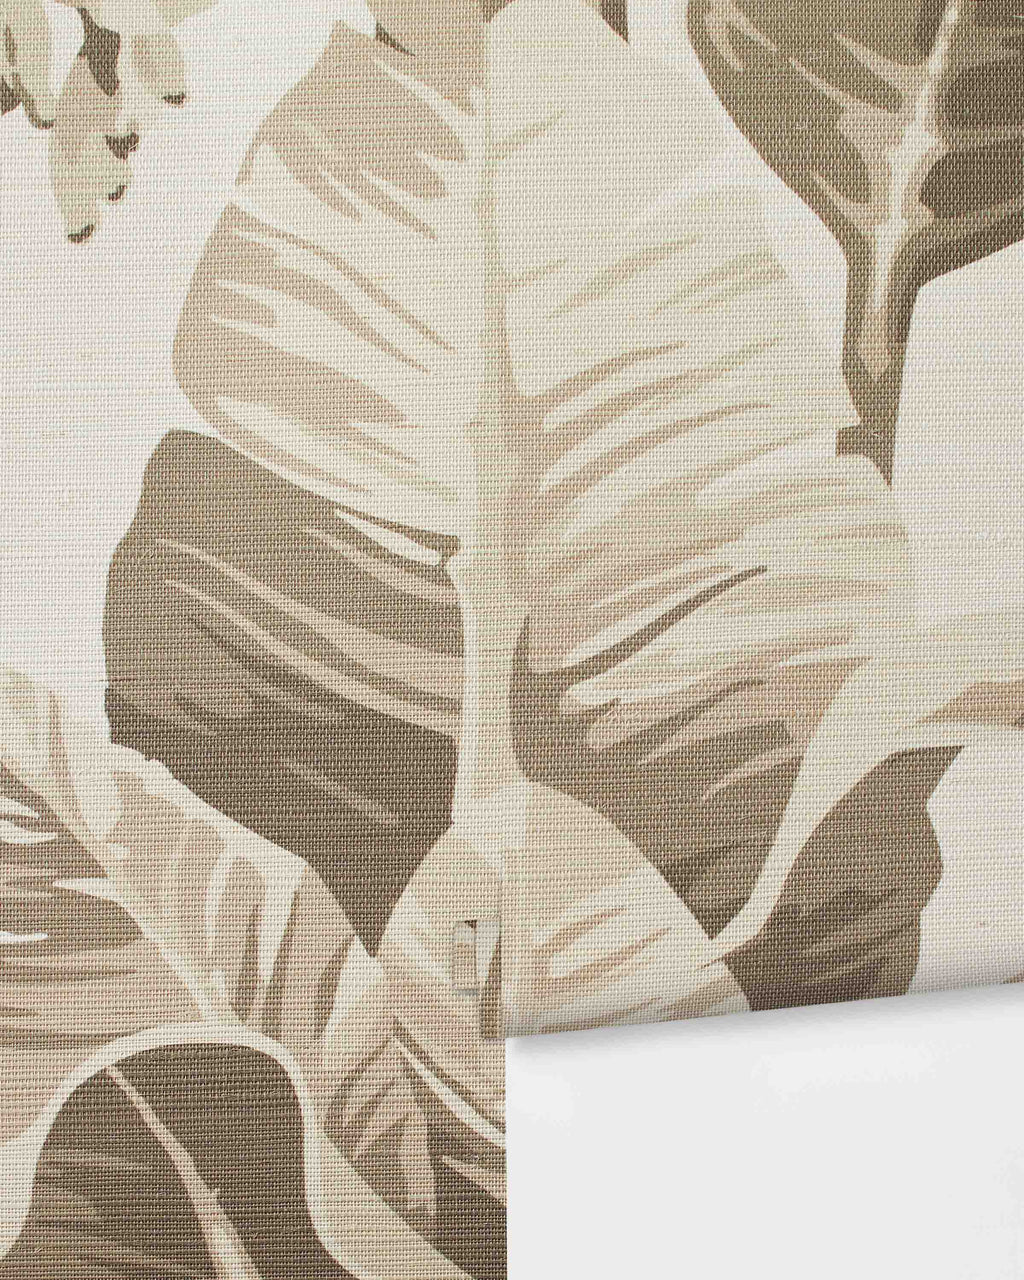 Pacifico Palm Grasscloth Wallpaper by Nathan Turner